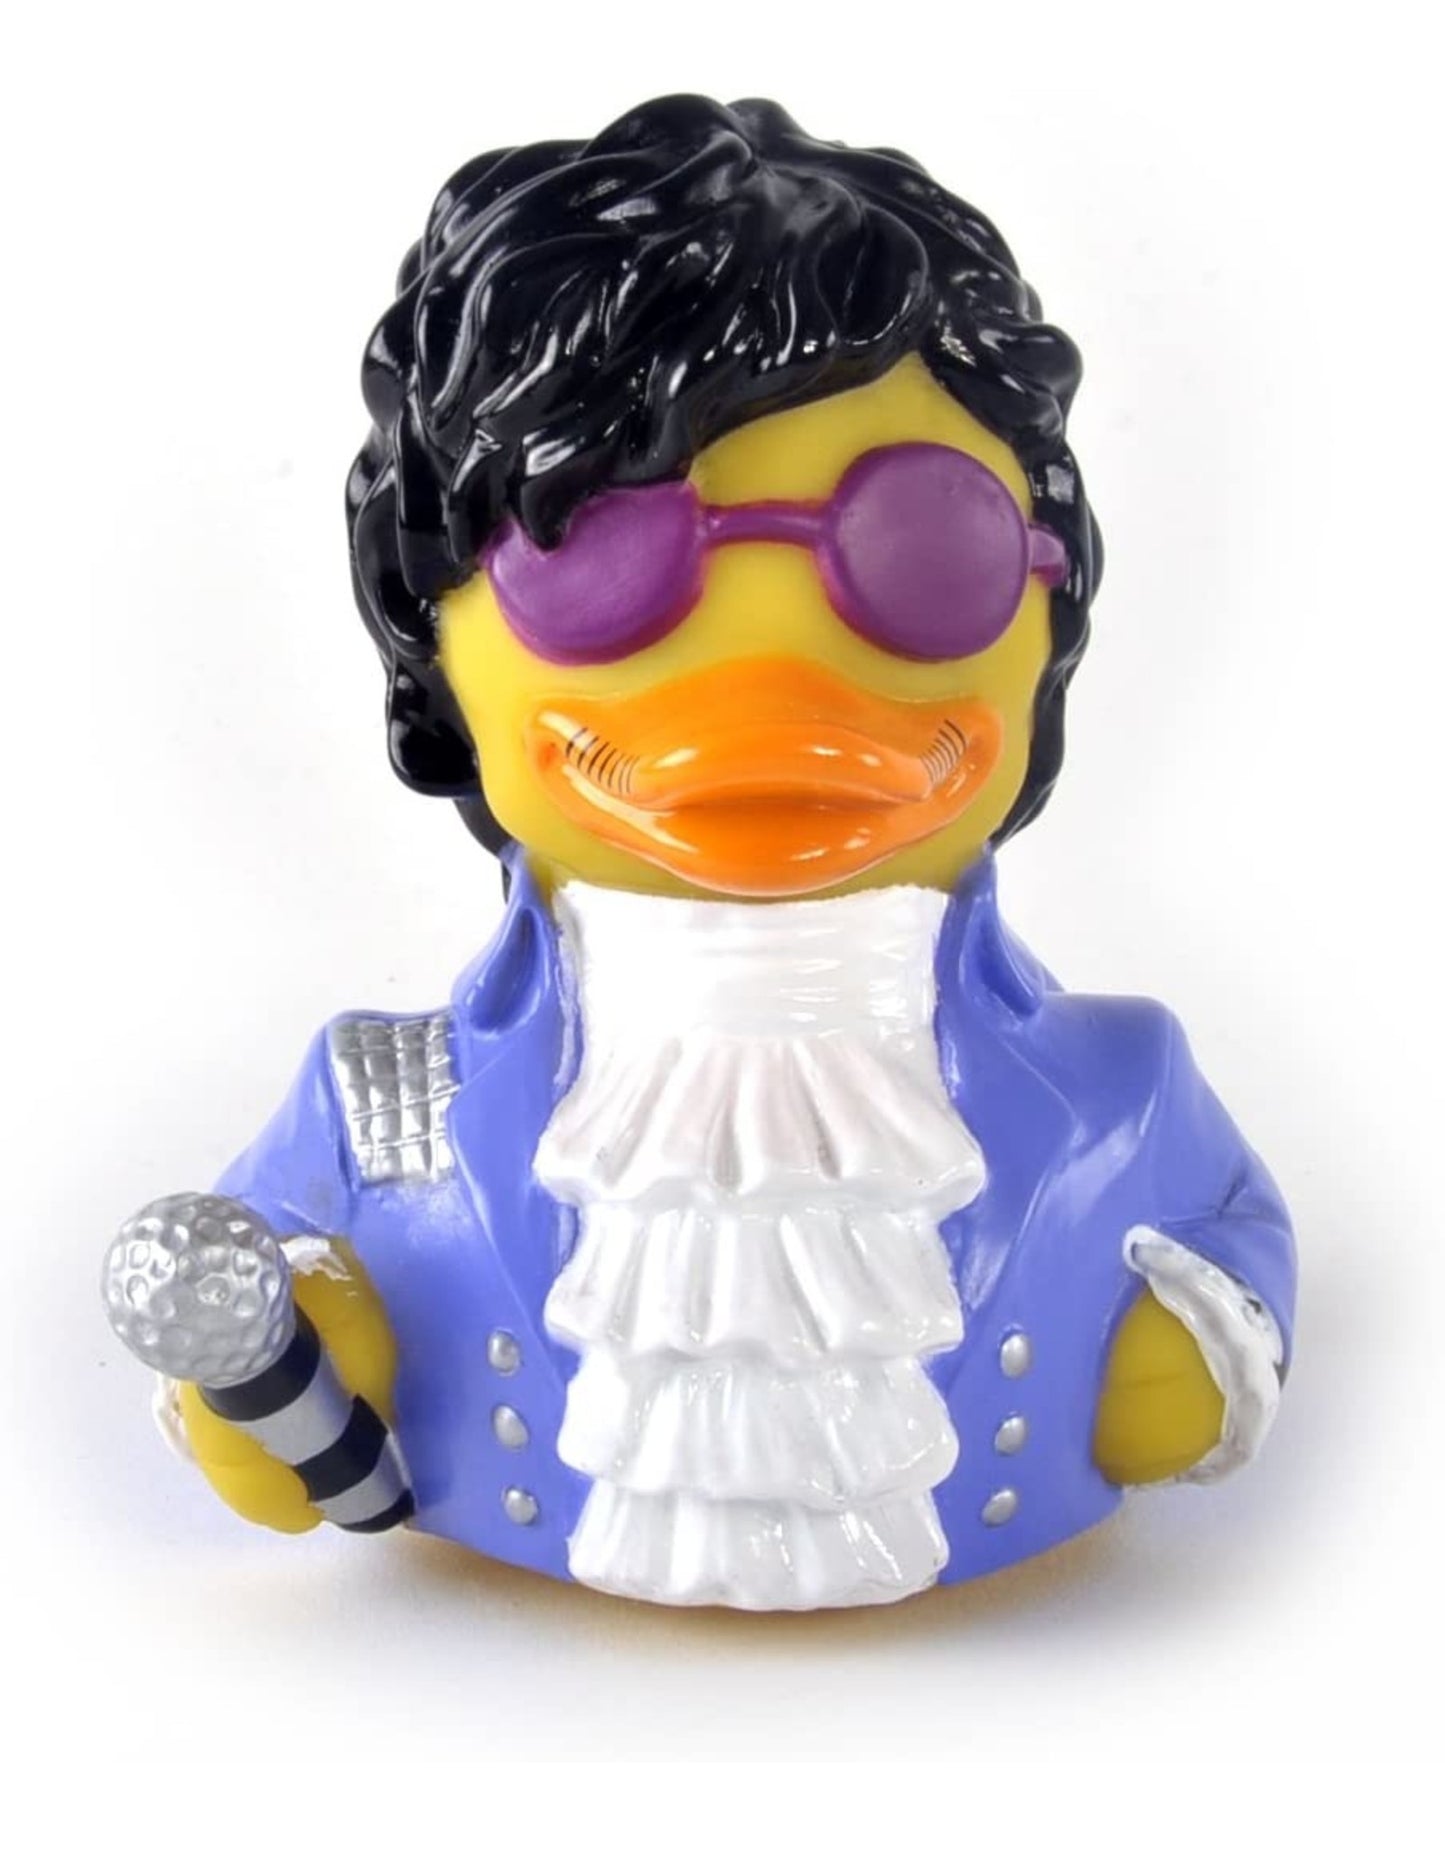 Prince "Paddle Like It's 1999" Rubber Duck